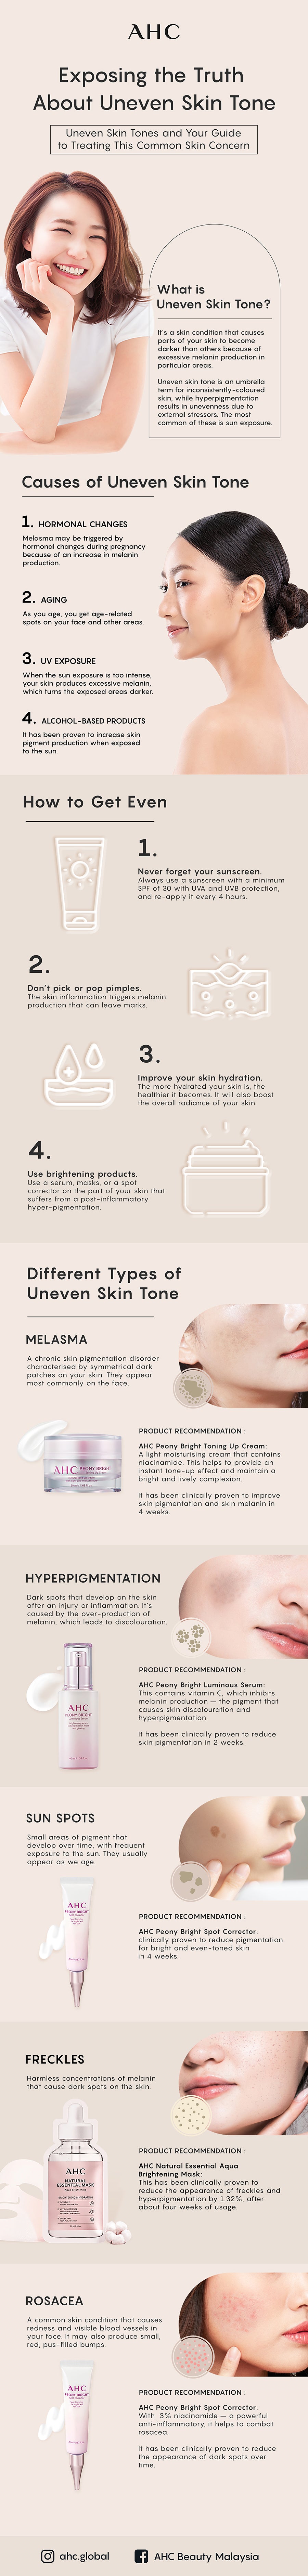 An infographic about exposing the truth about uneven skin tone and how to treat it.